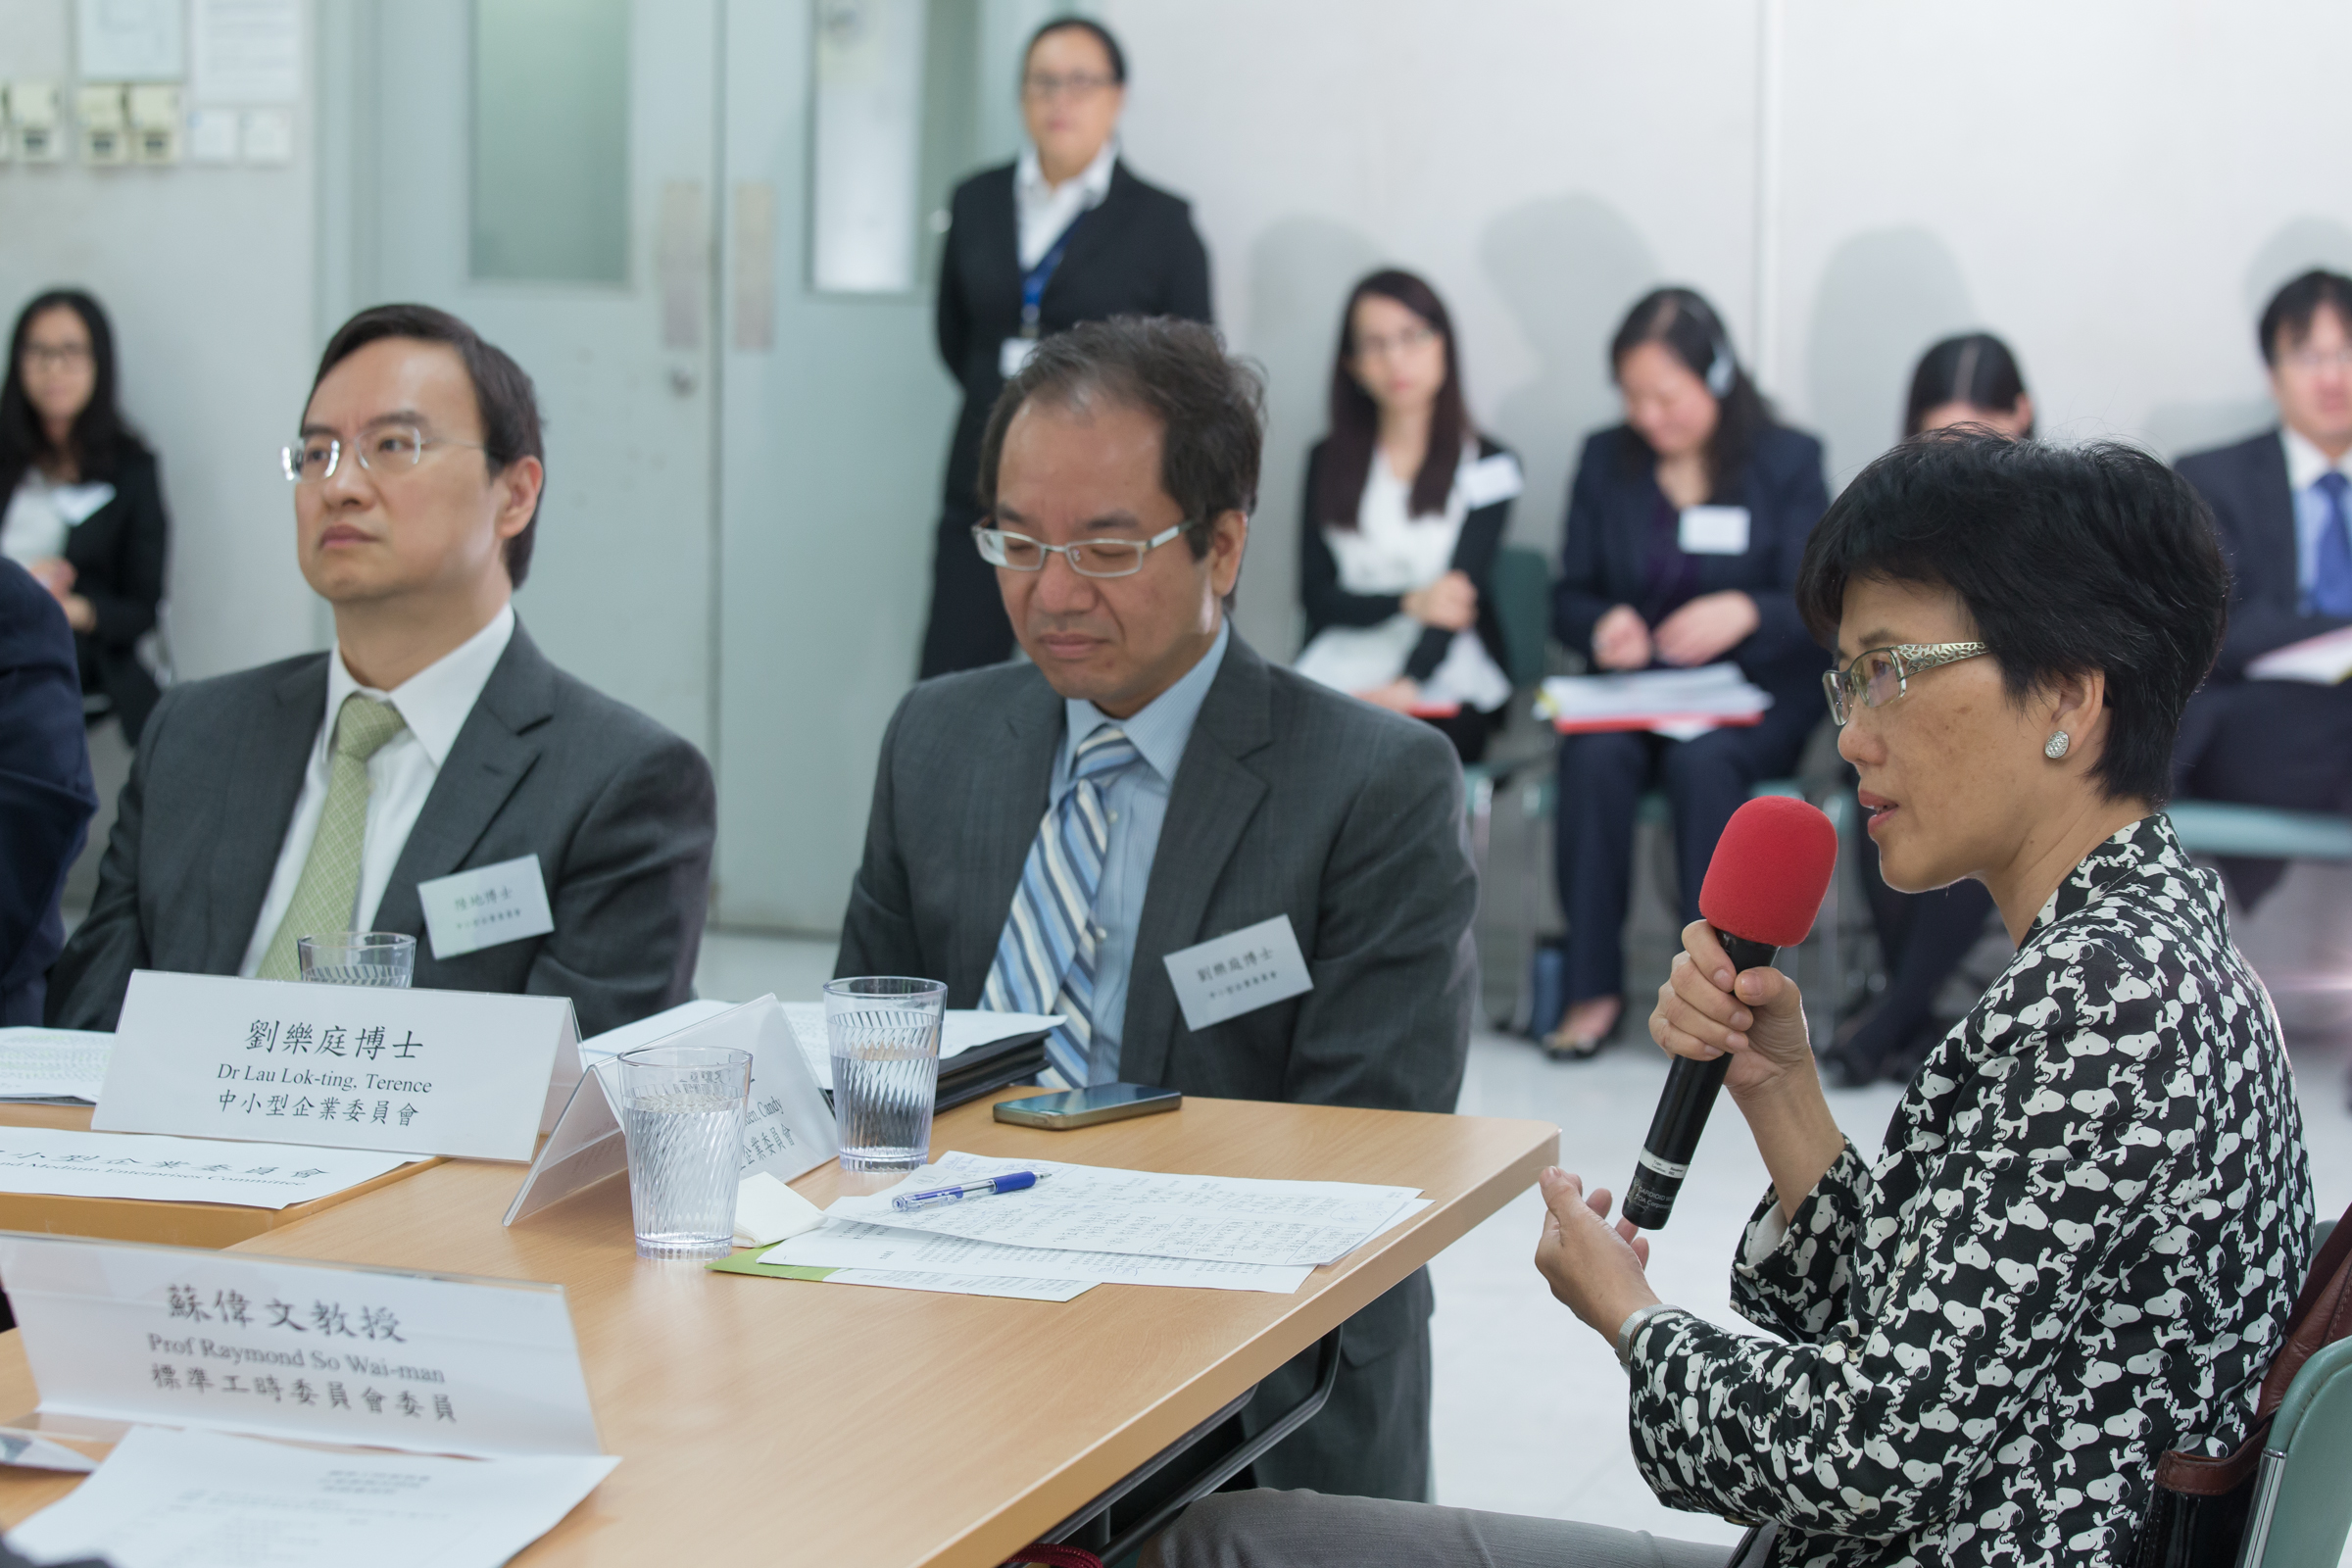 Photo 5 : Members of the Small and Medium Enterprises Committee attended a consultation symposium organised by the Standard Working Hours Committee on 15 May 2014 to reflect the views of local SMEs on standard working hours.